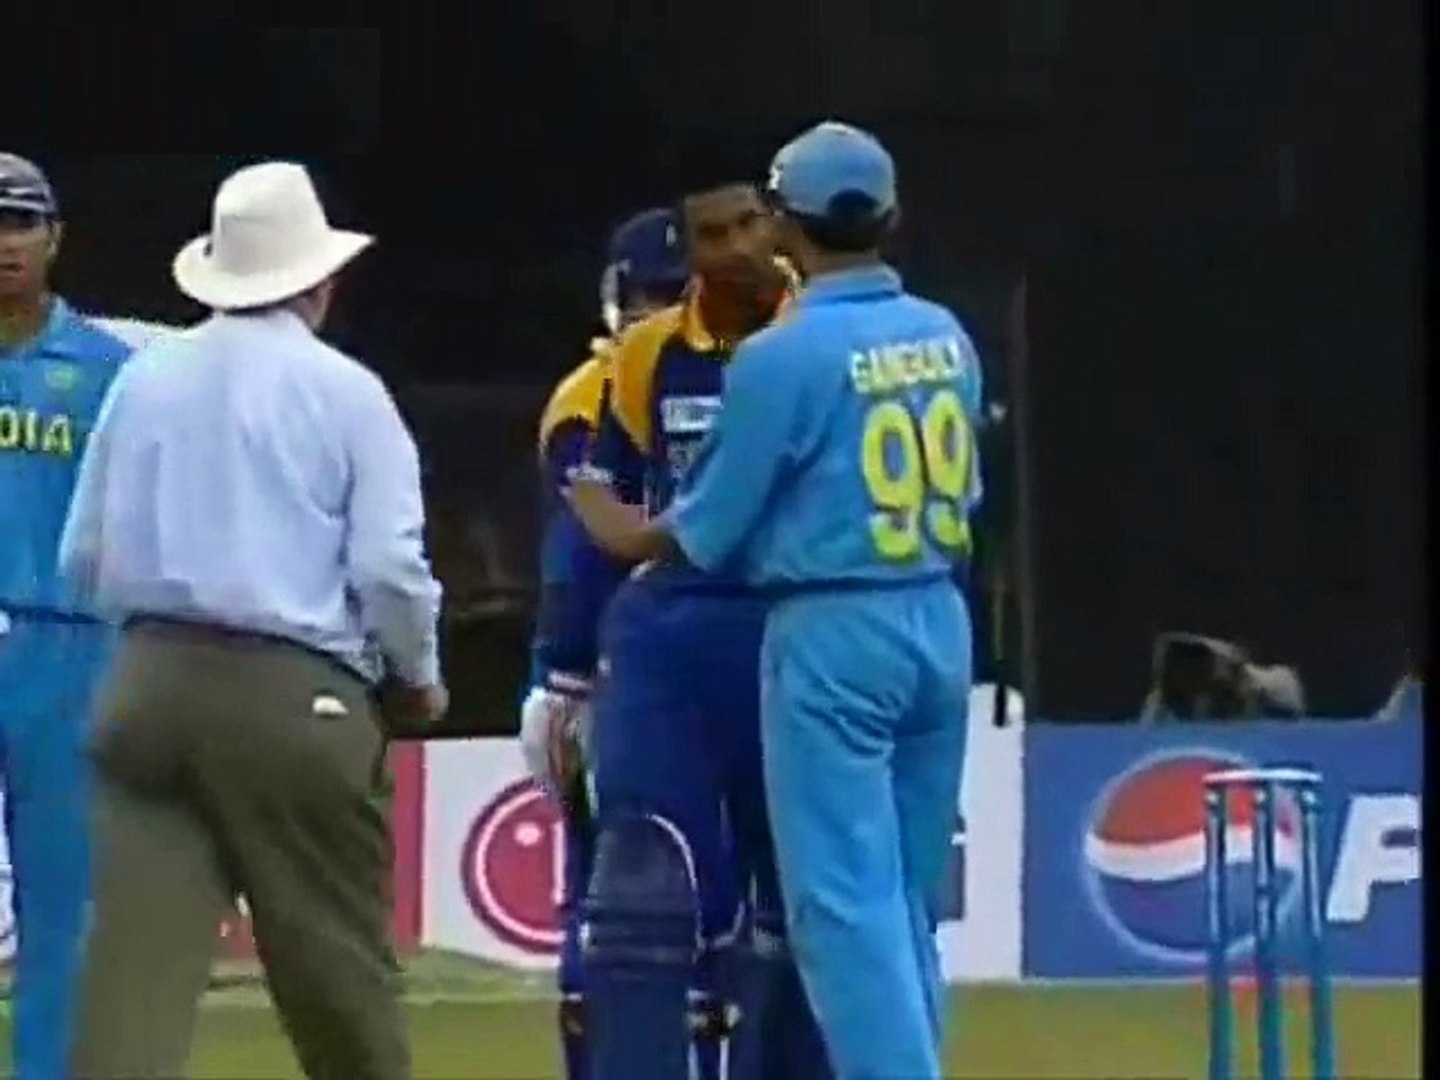 Ganguly arguing with Arnold over running on the pitch | Screengrab